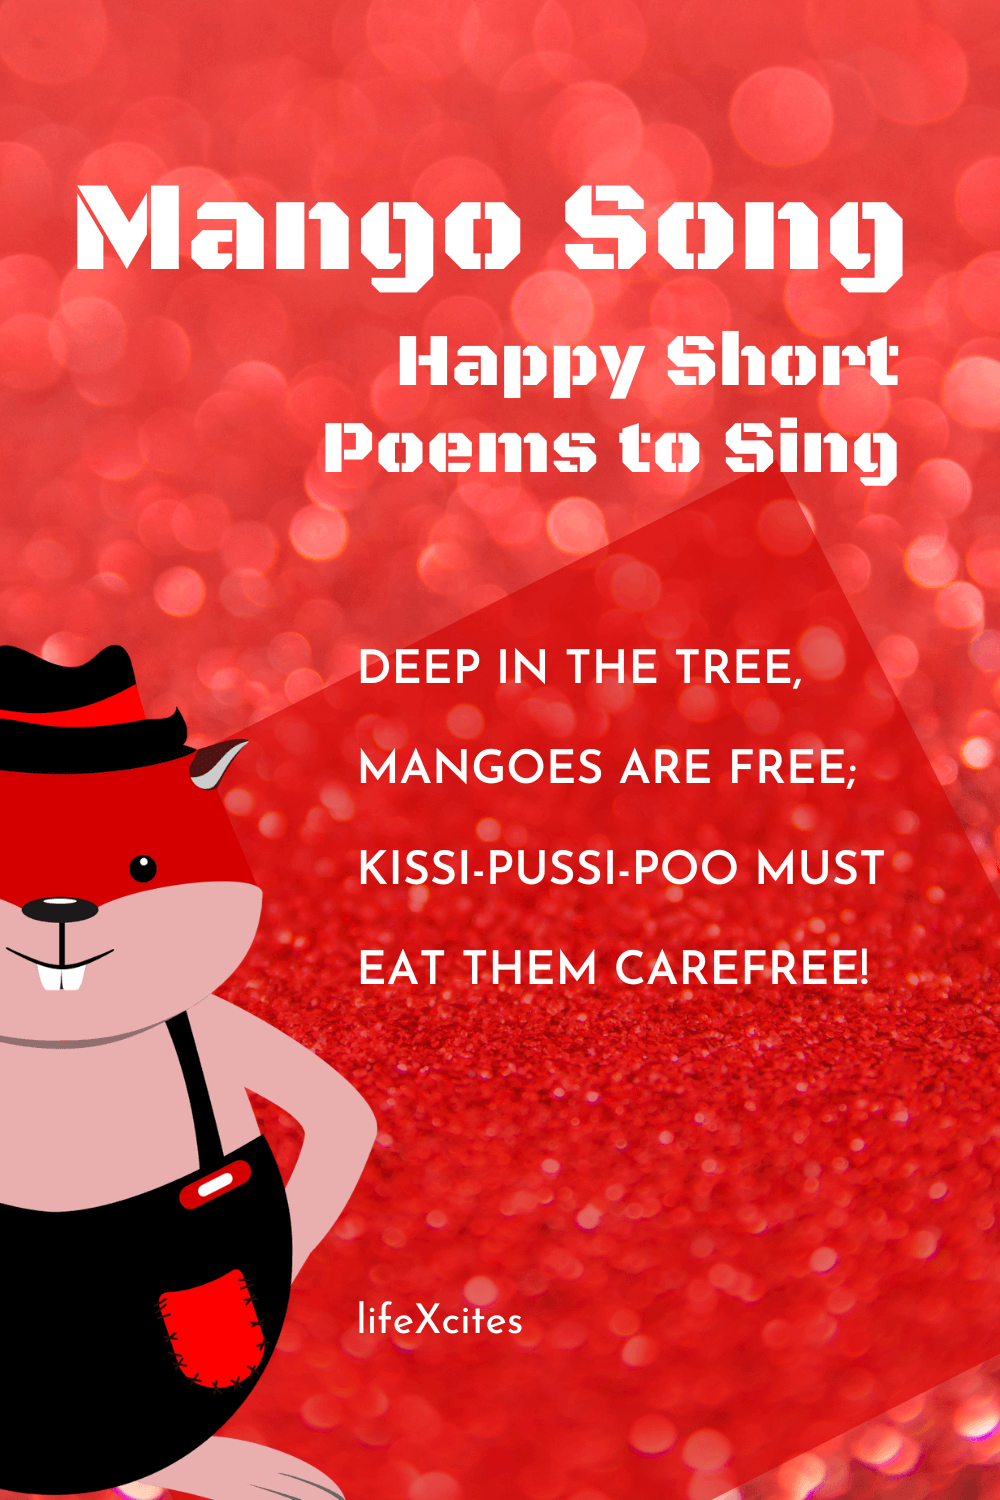 Happy Short Poems to Sing